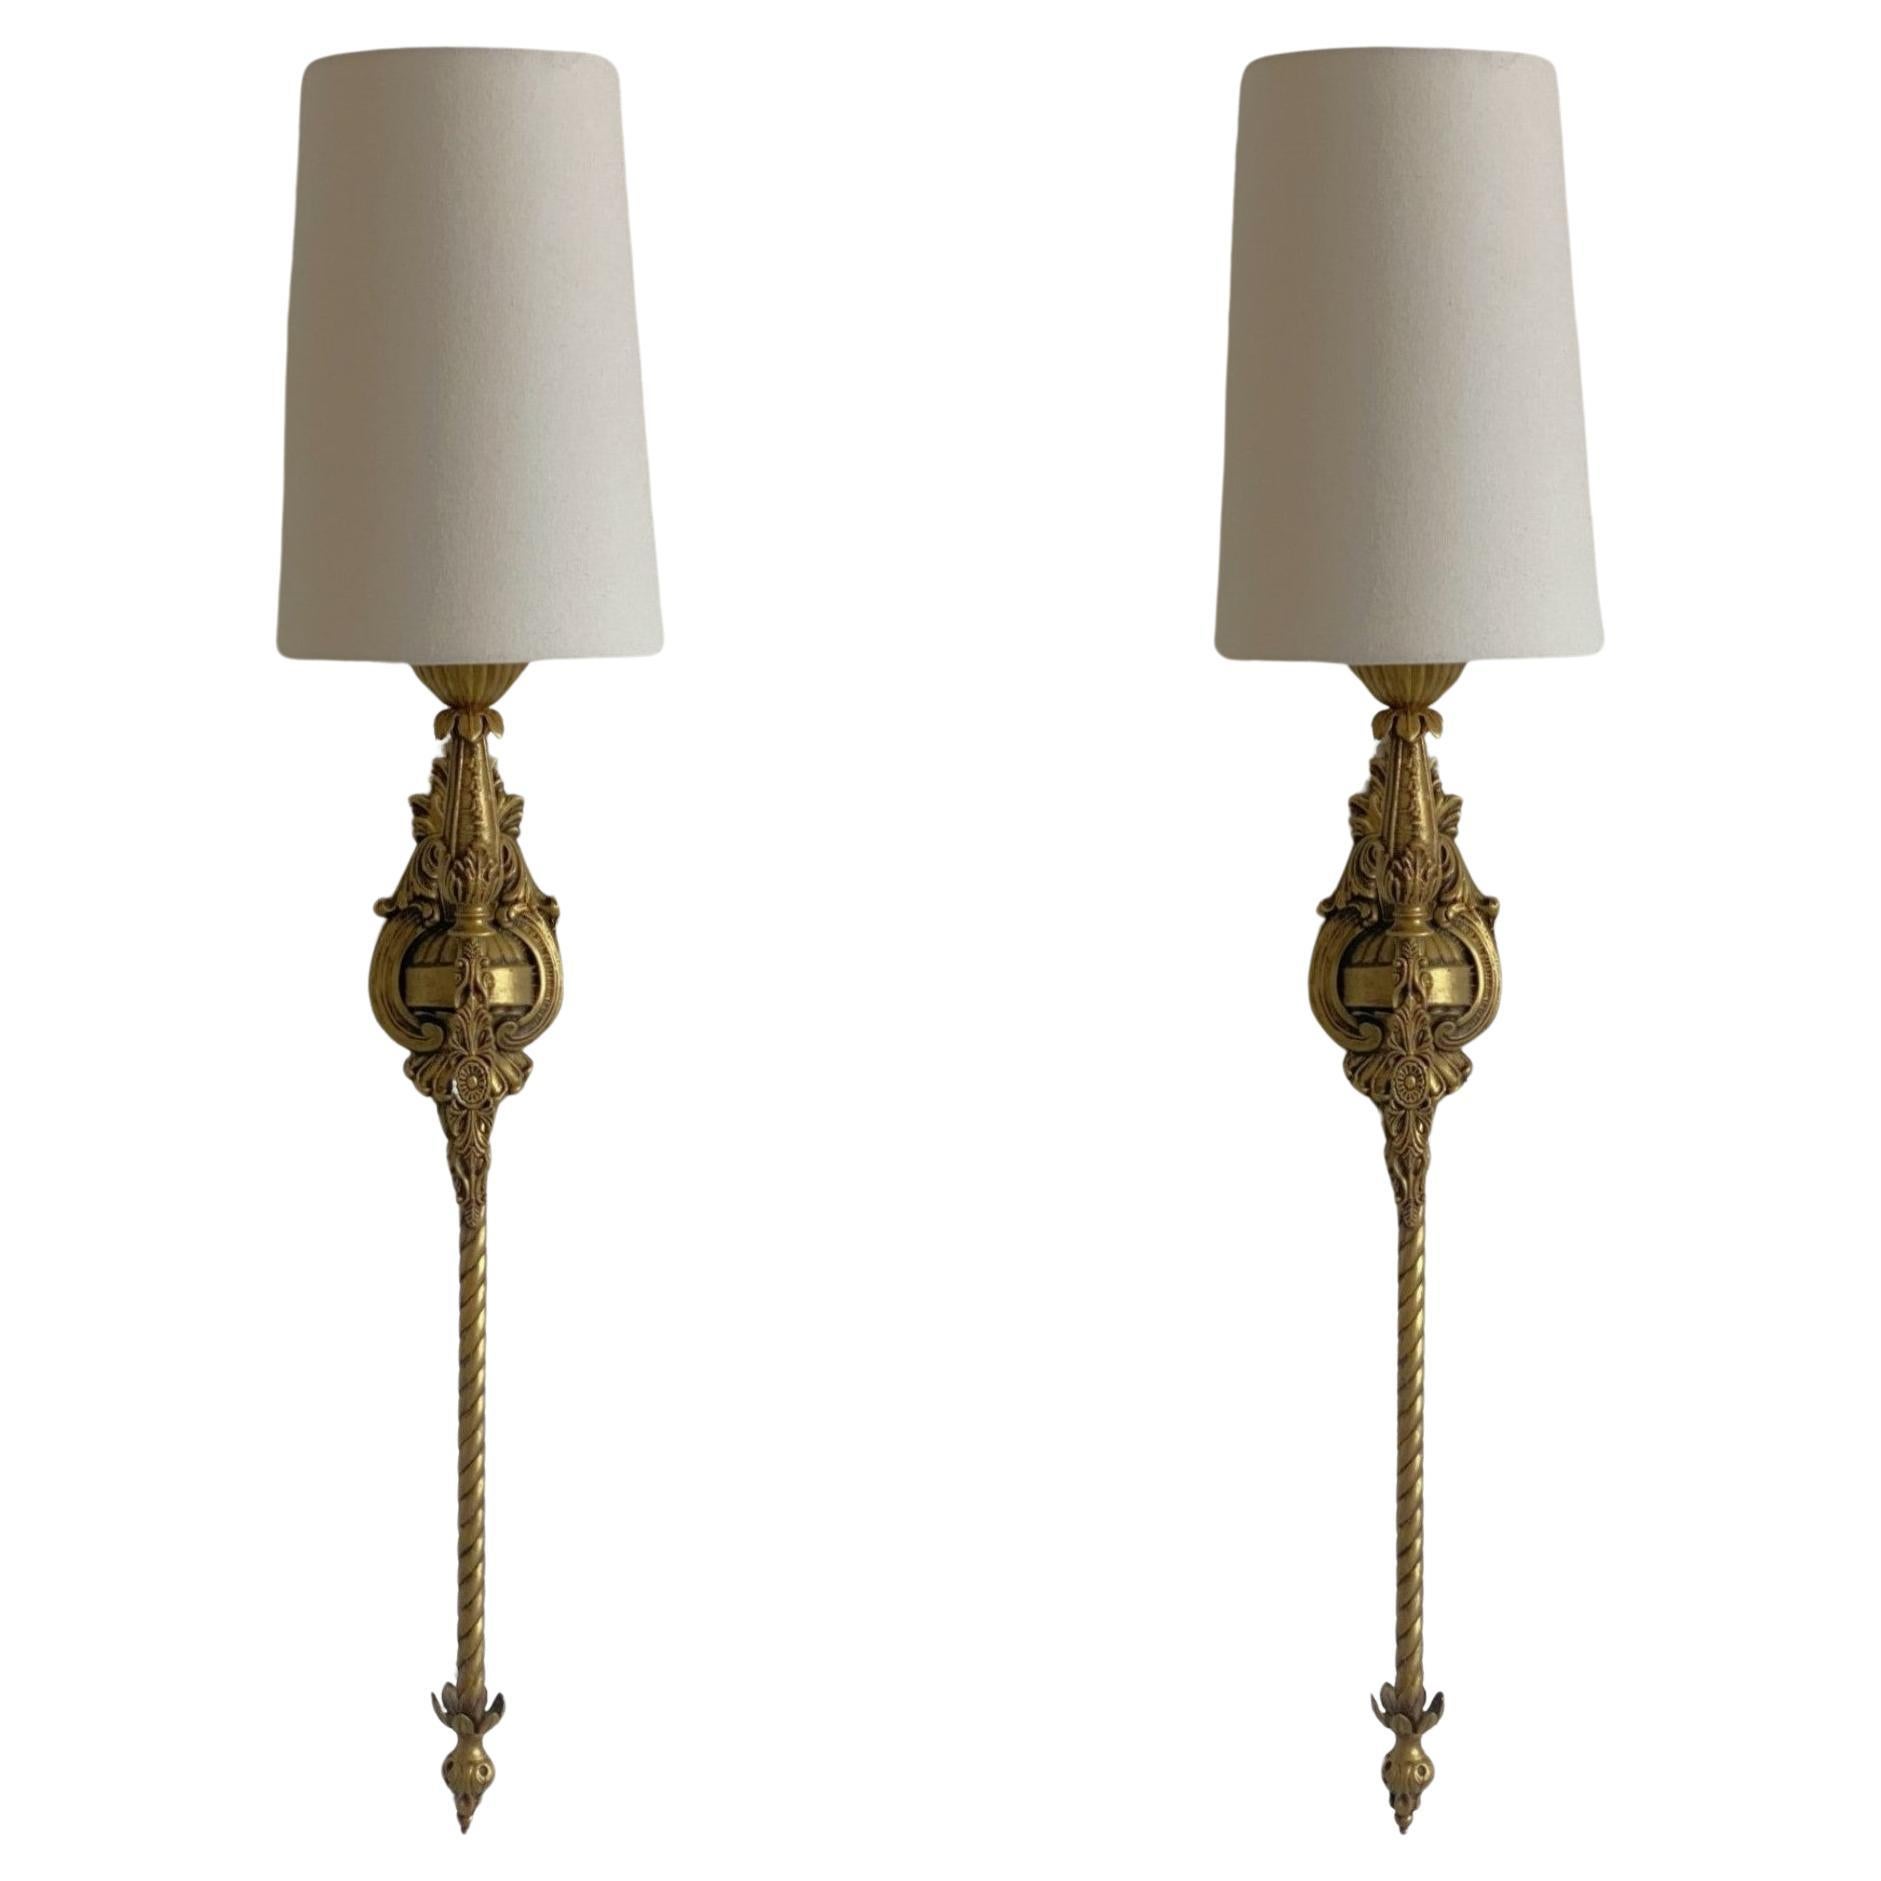 Pair of French Antique Torchiere Wall Sconces Converted to Electric Wall lights